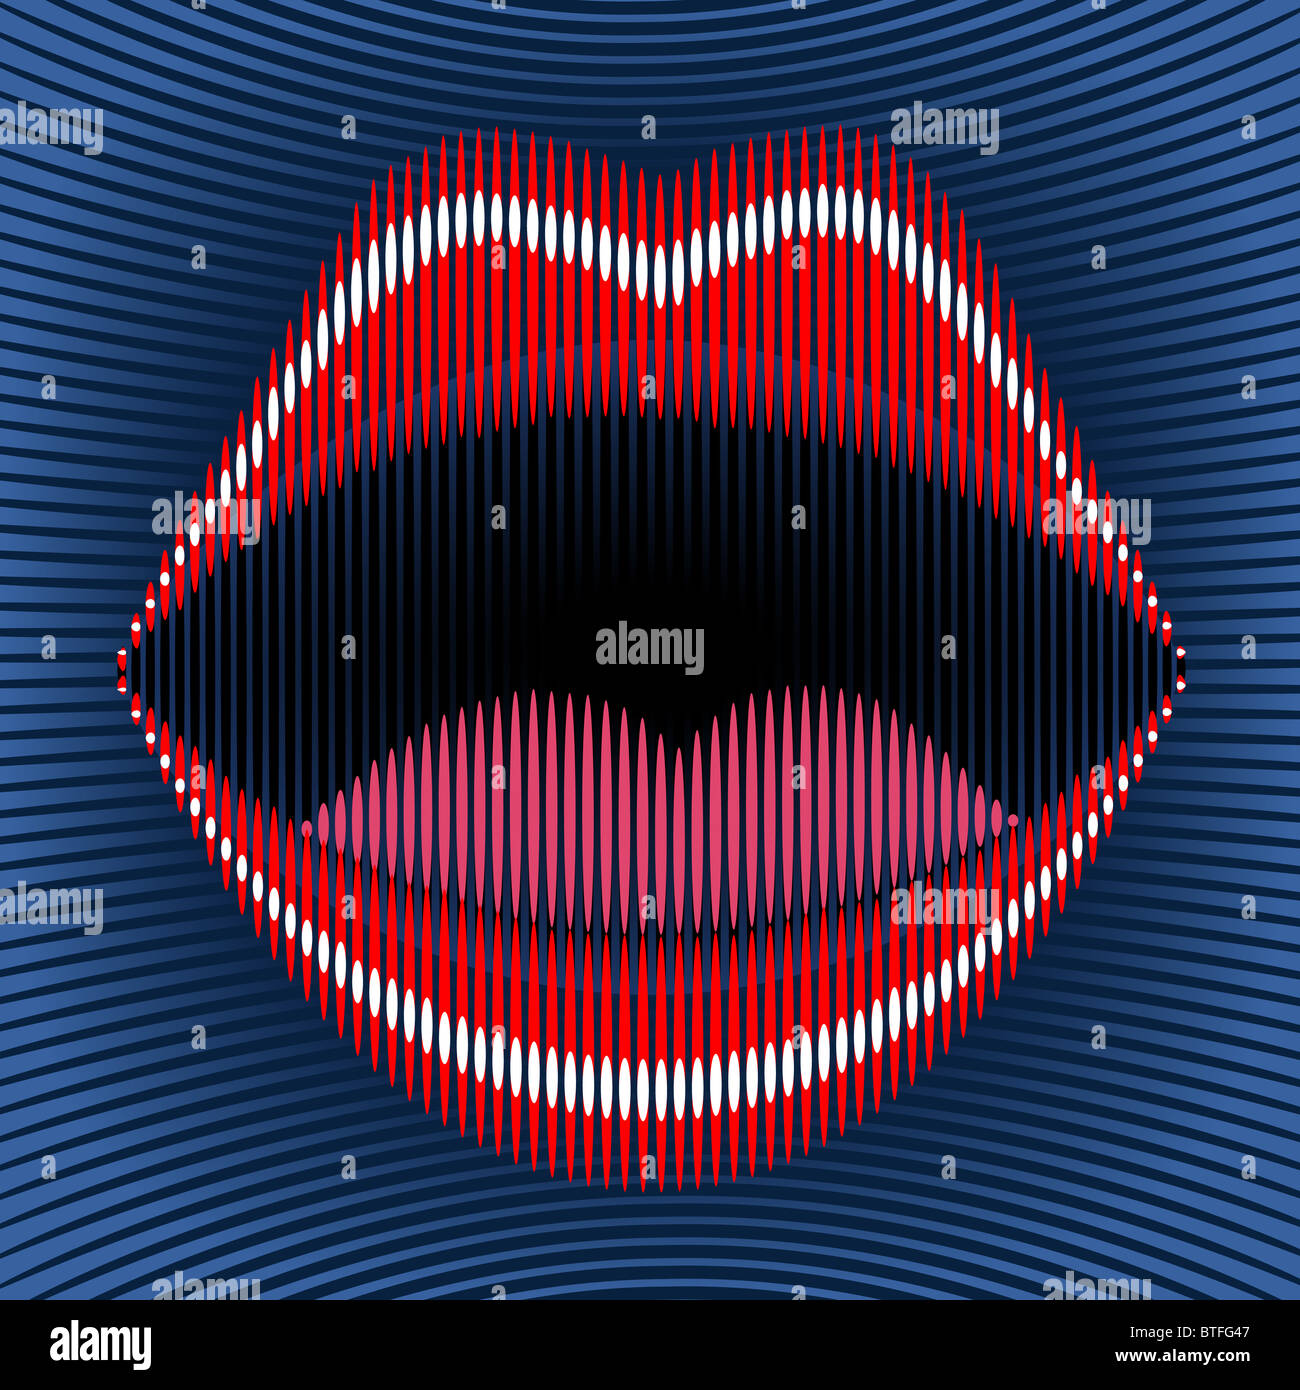 Illustration of lips made of stripes Stock Photo